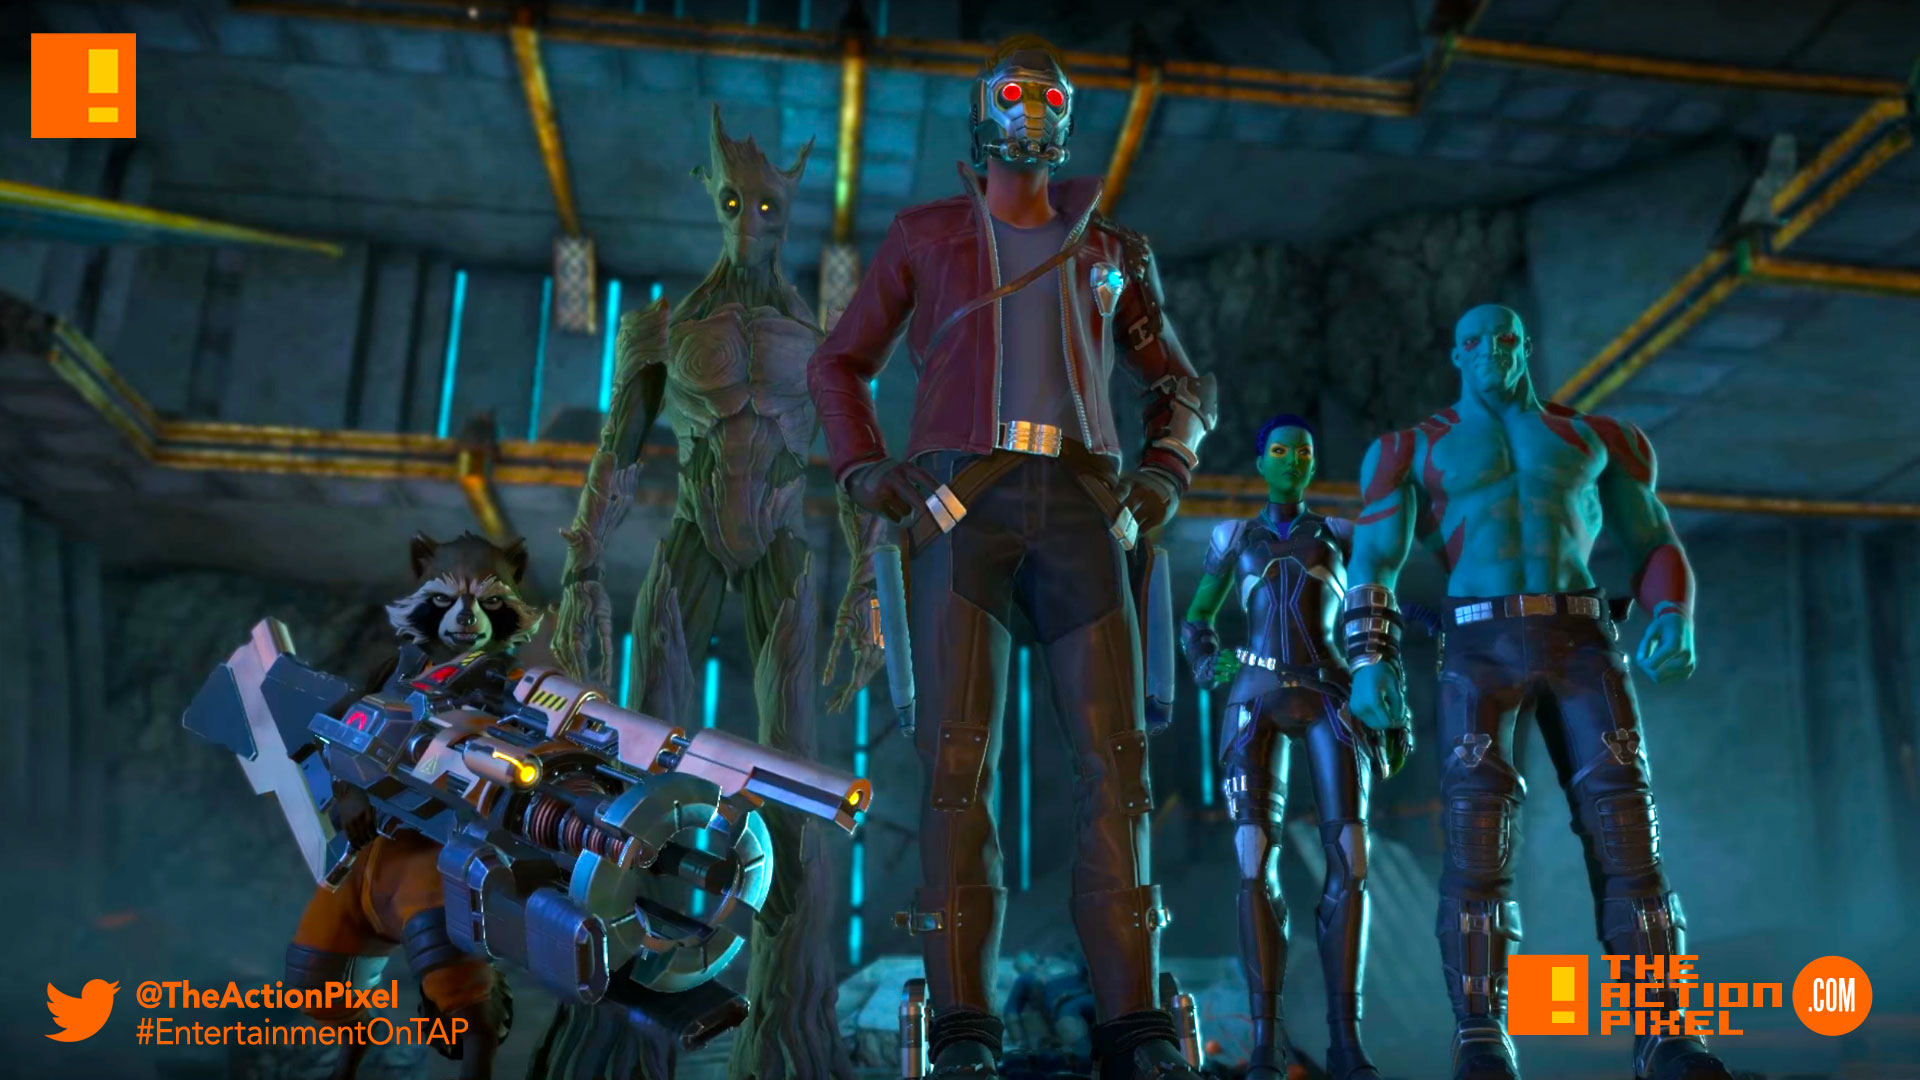 gotg, telltale games, telltale series, marvel, guardians of the galaxy, entertainment on tap, the action pixel,rocket ,raccoon, star-lord, drax, gamora,trailer, official trailer,